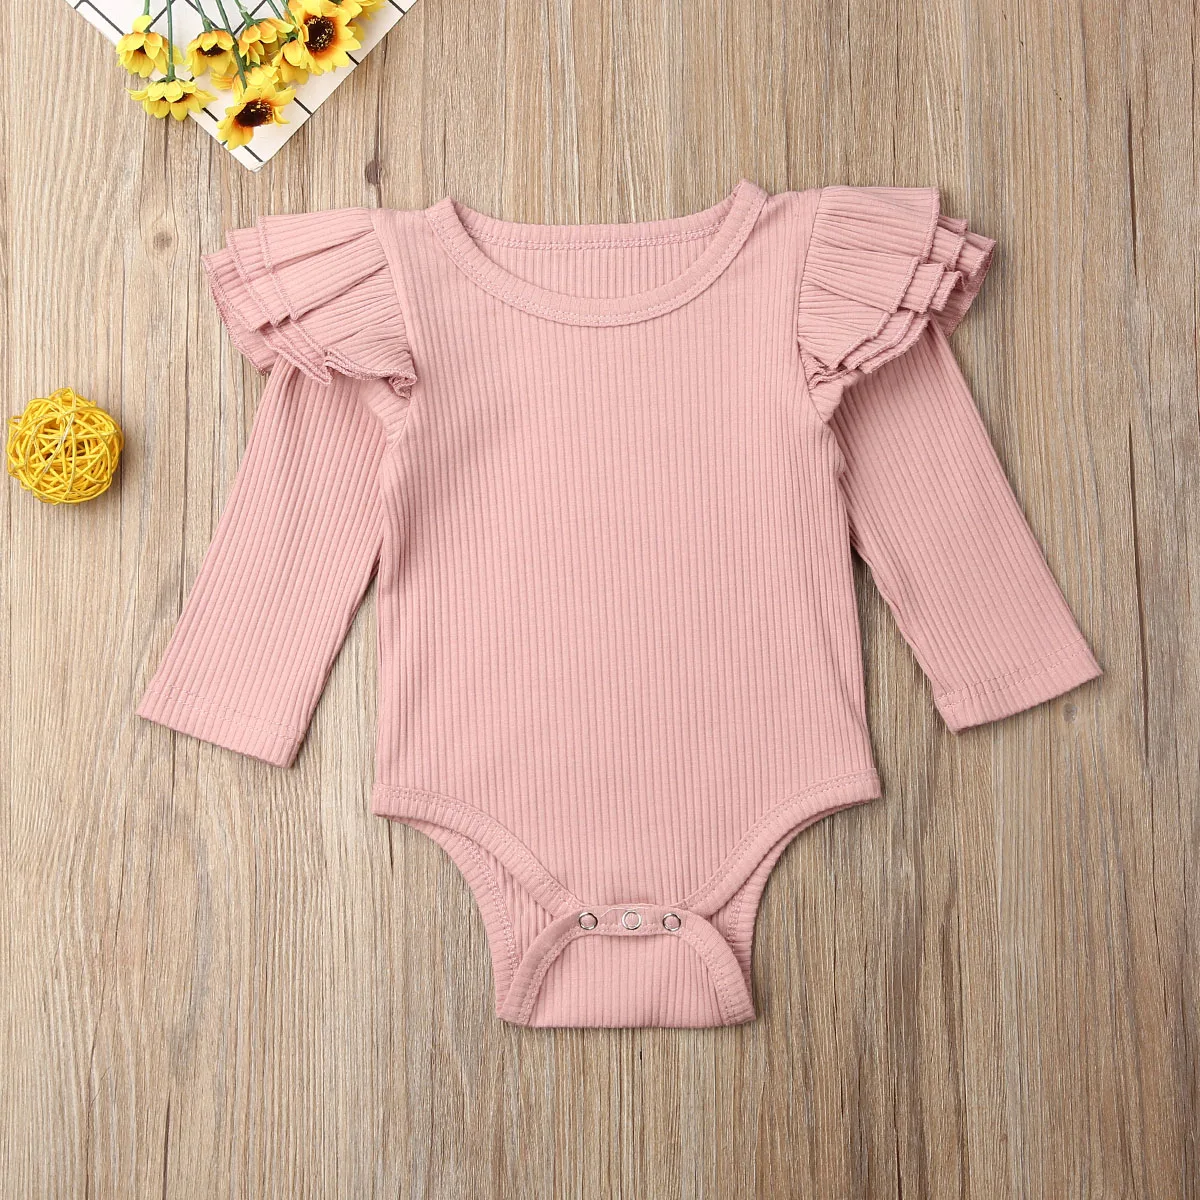 baby bodysuit dress 4 Color Newborn Baby Girl Clothes Tops Long Sleeve Solid Knitted Ruffles Romper Sunsuit Outfit Baby Spring Autumn Clothing best Baby Bodysuits